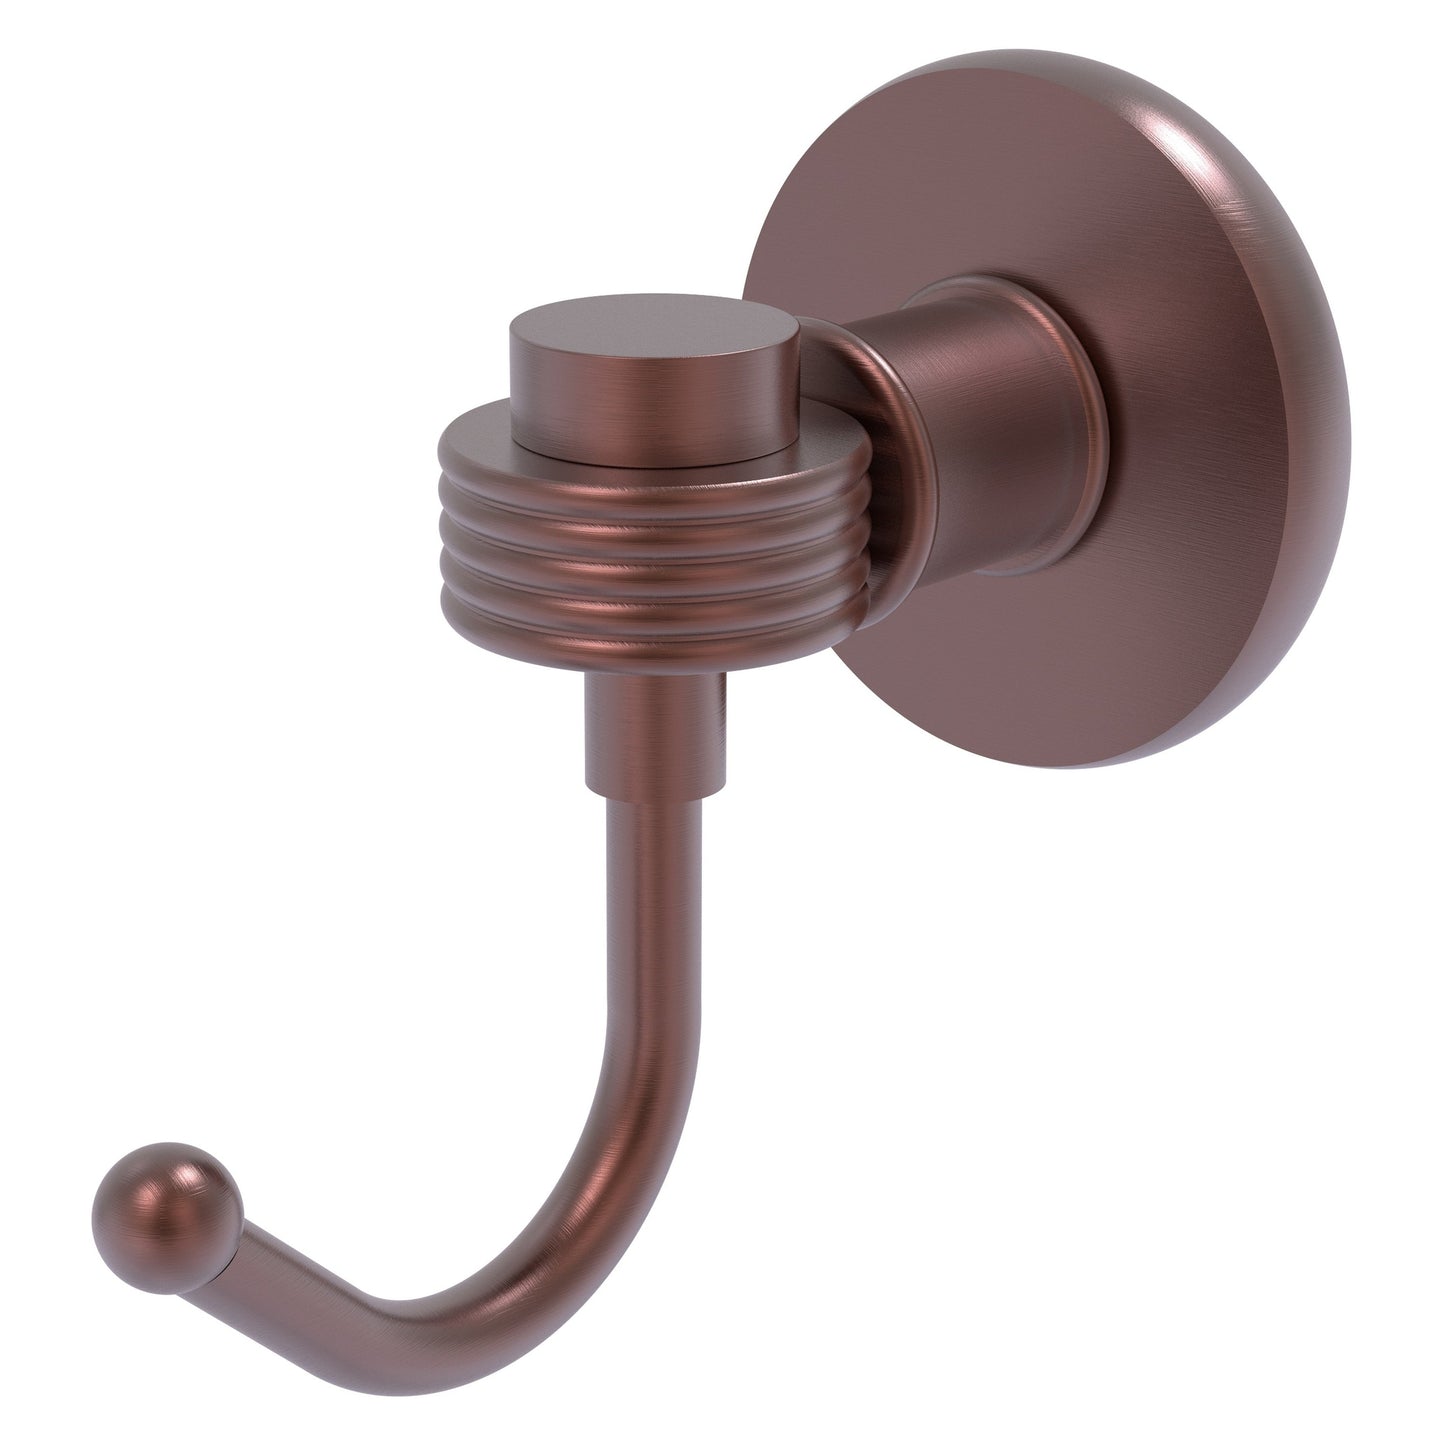 Allied Brass Skyline 2020G 2.8" x 4.77" Antique Copper Solid Brass Robe Hook With Grooved Accents